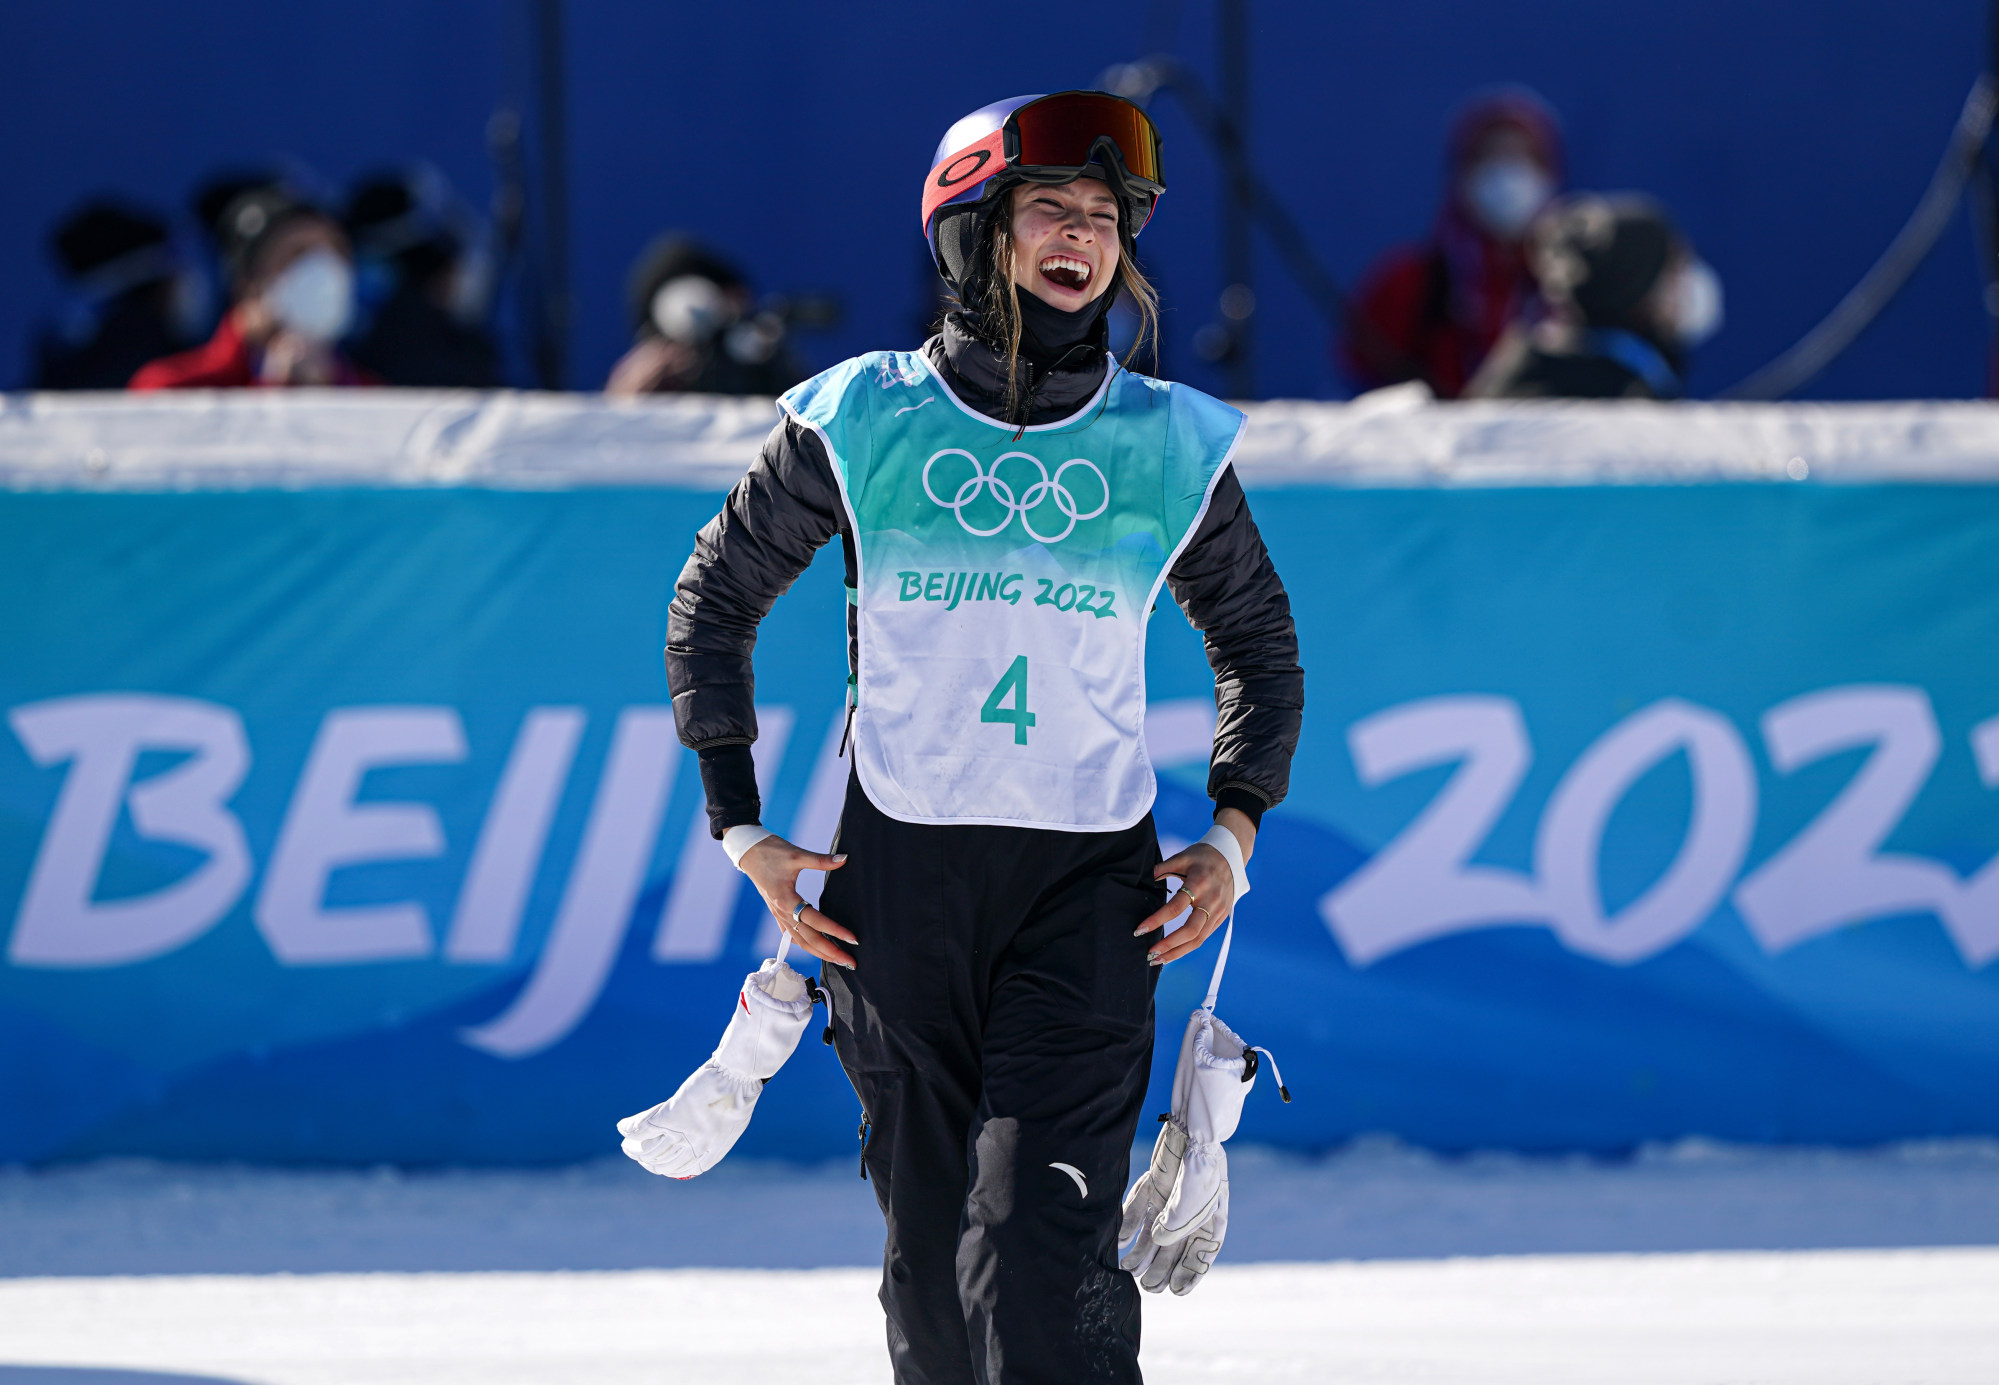 Winter Olympics: Eileen Gu, the making of 'the people's champion